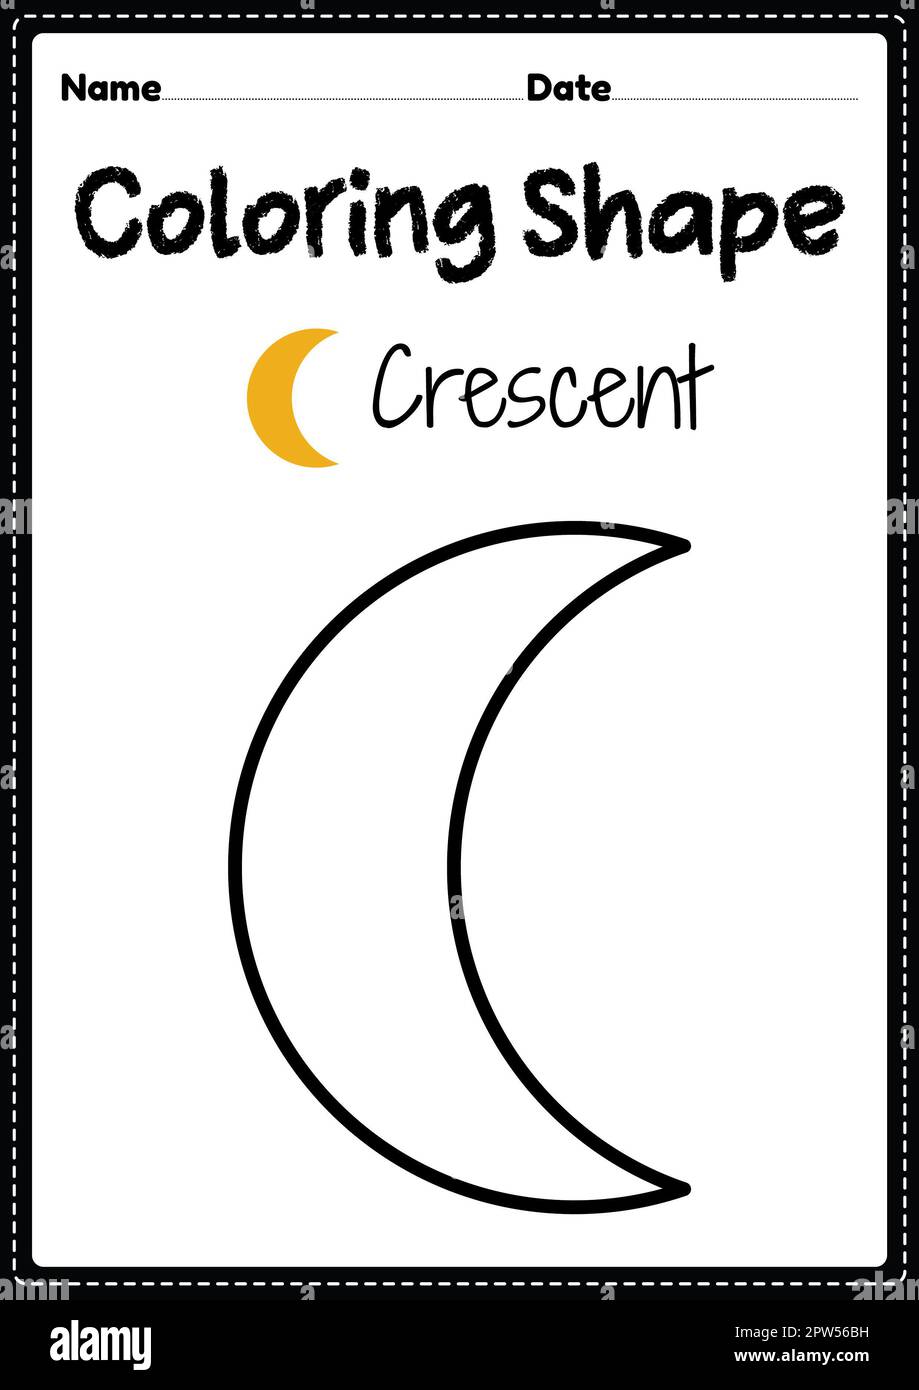 Crescent Moon Coloring Page  Moon coloring pages, Cresent moon tattoo, Crescent  moon tattoo